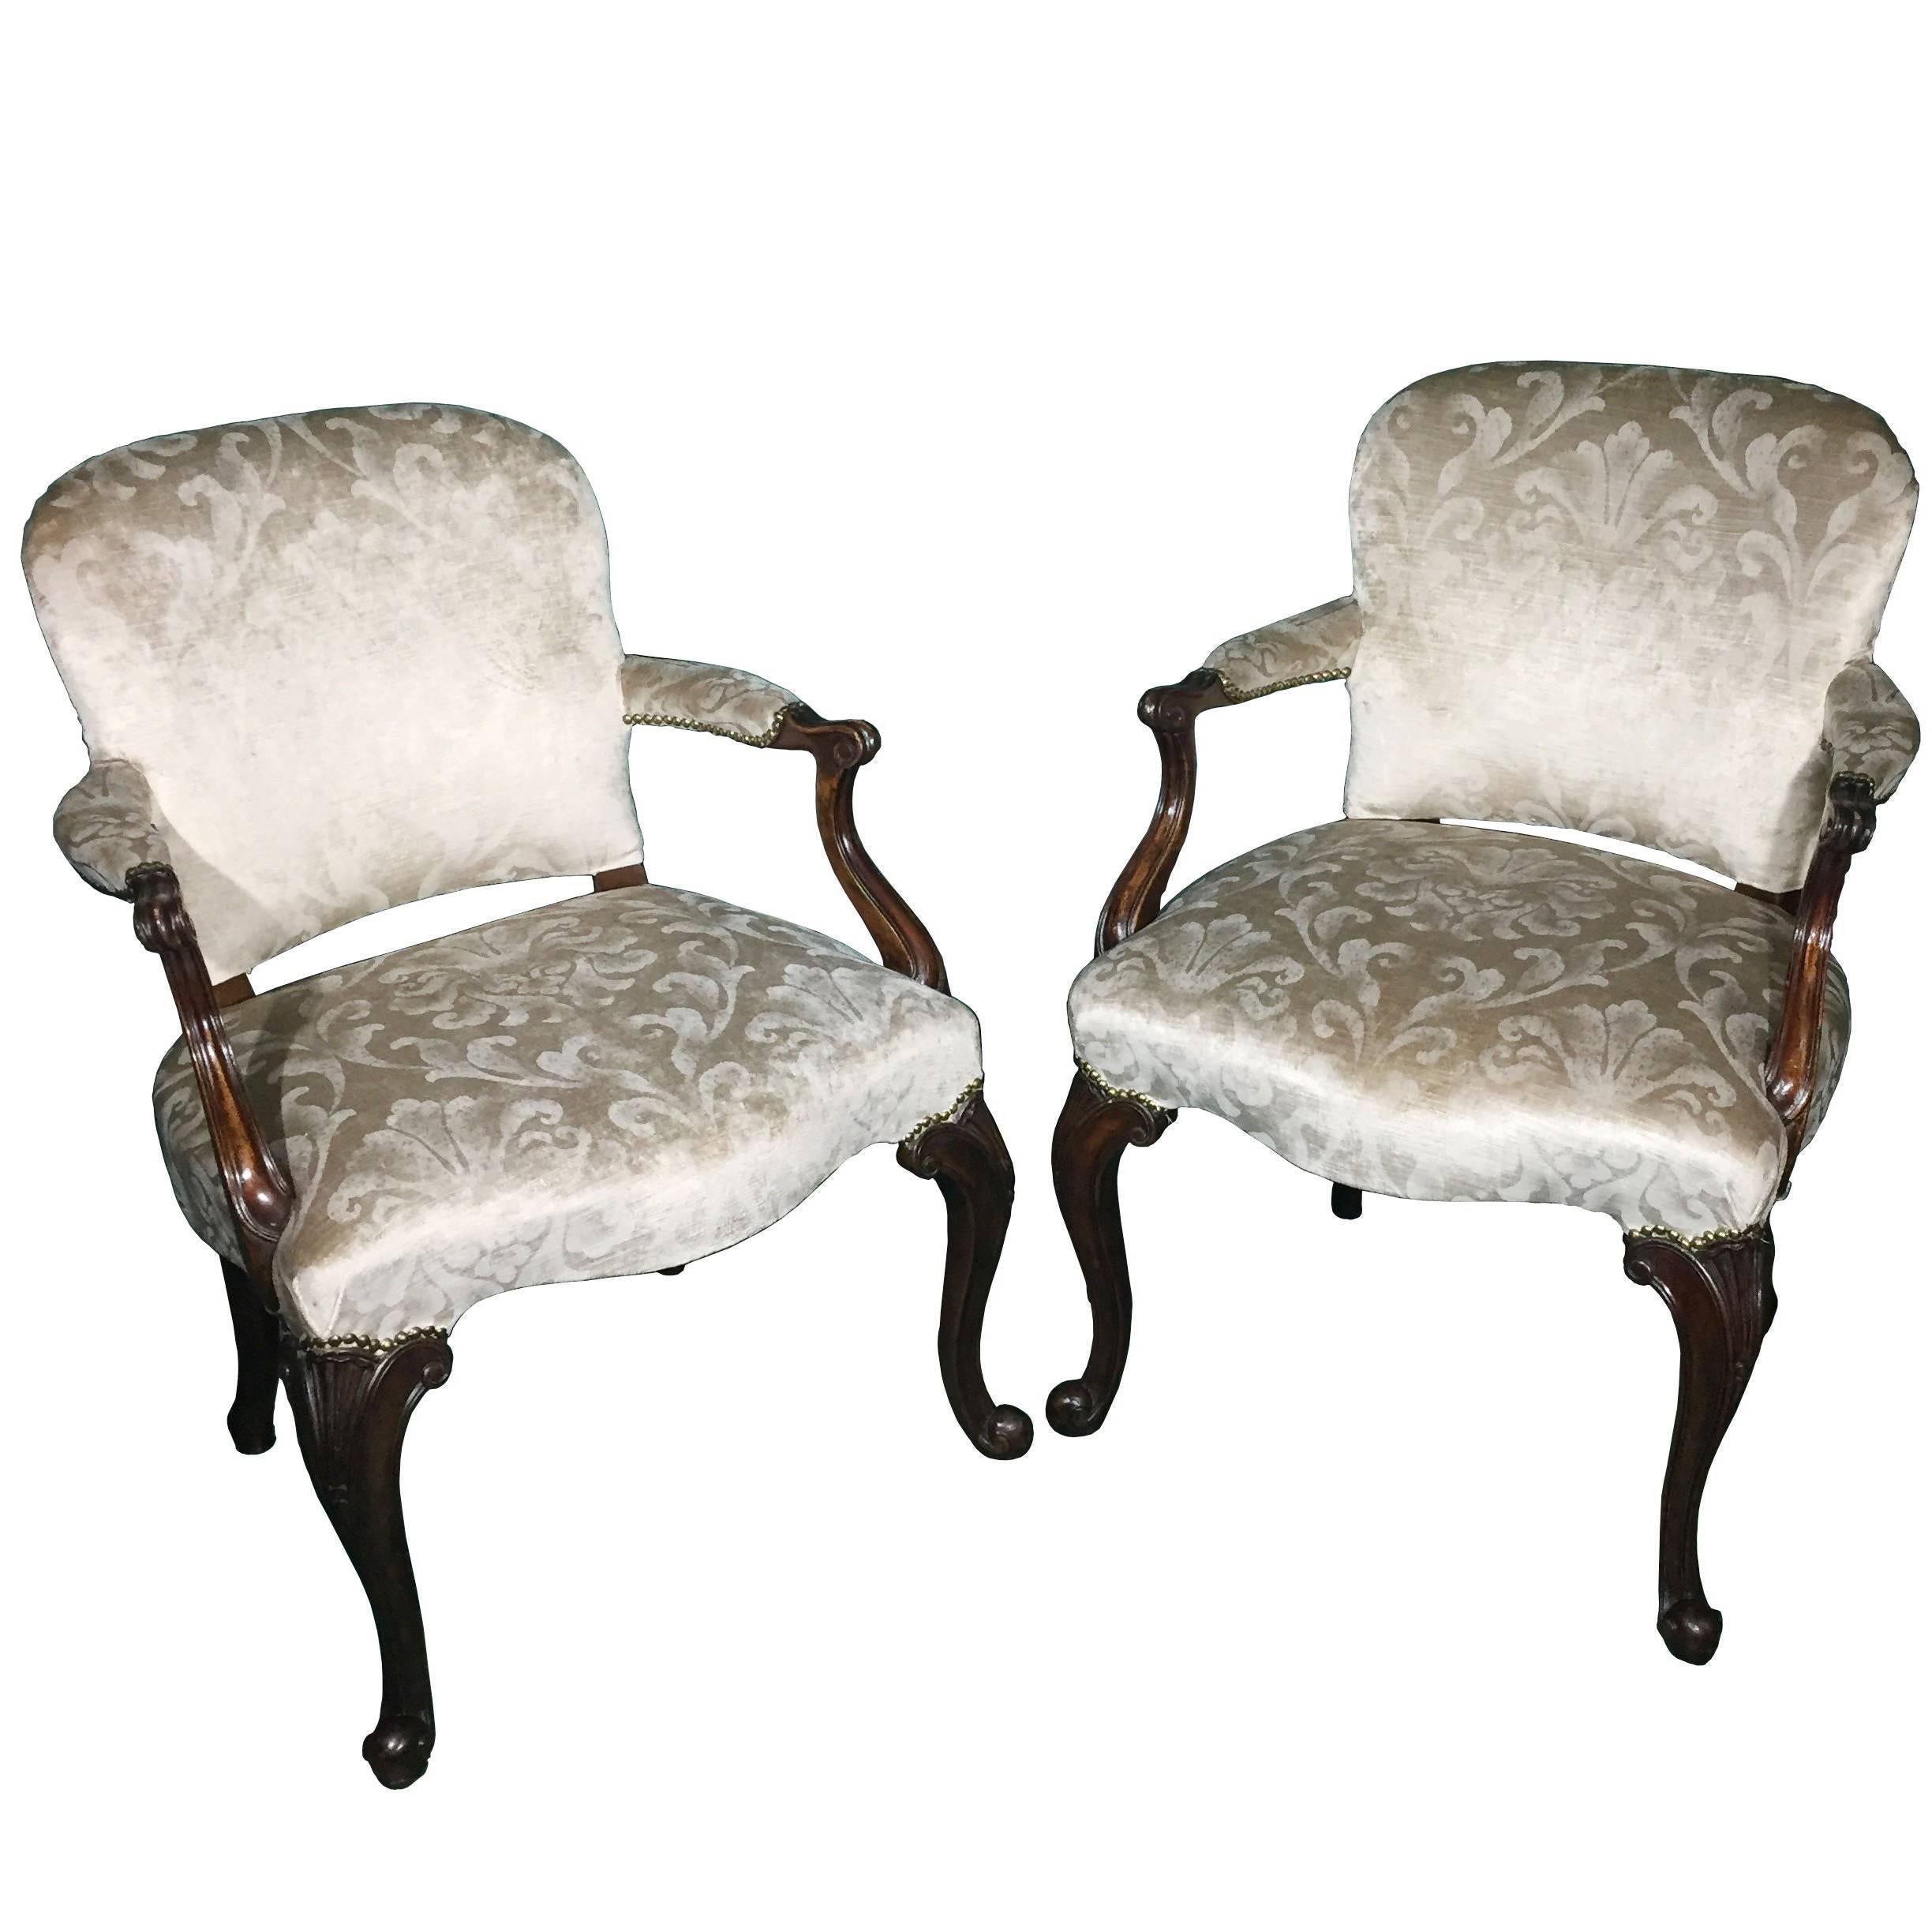 Superb Pair of Victorian Antique Mahogany Chairs, 1880 For Sale